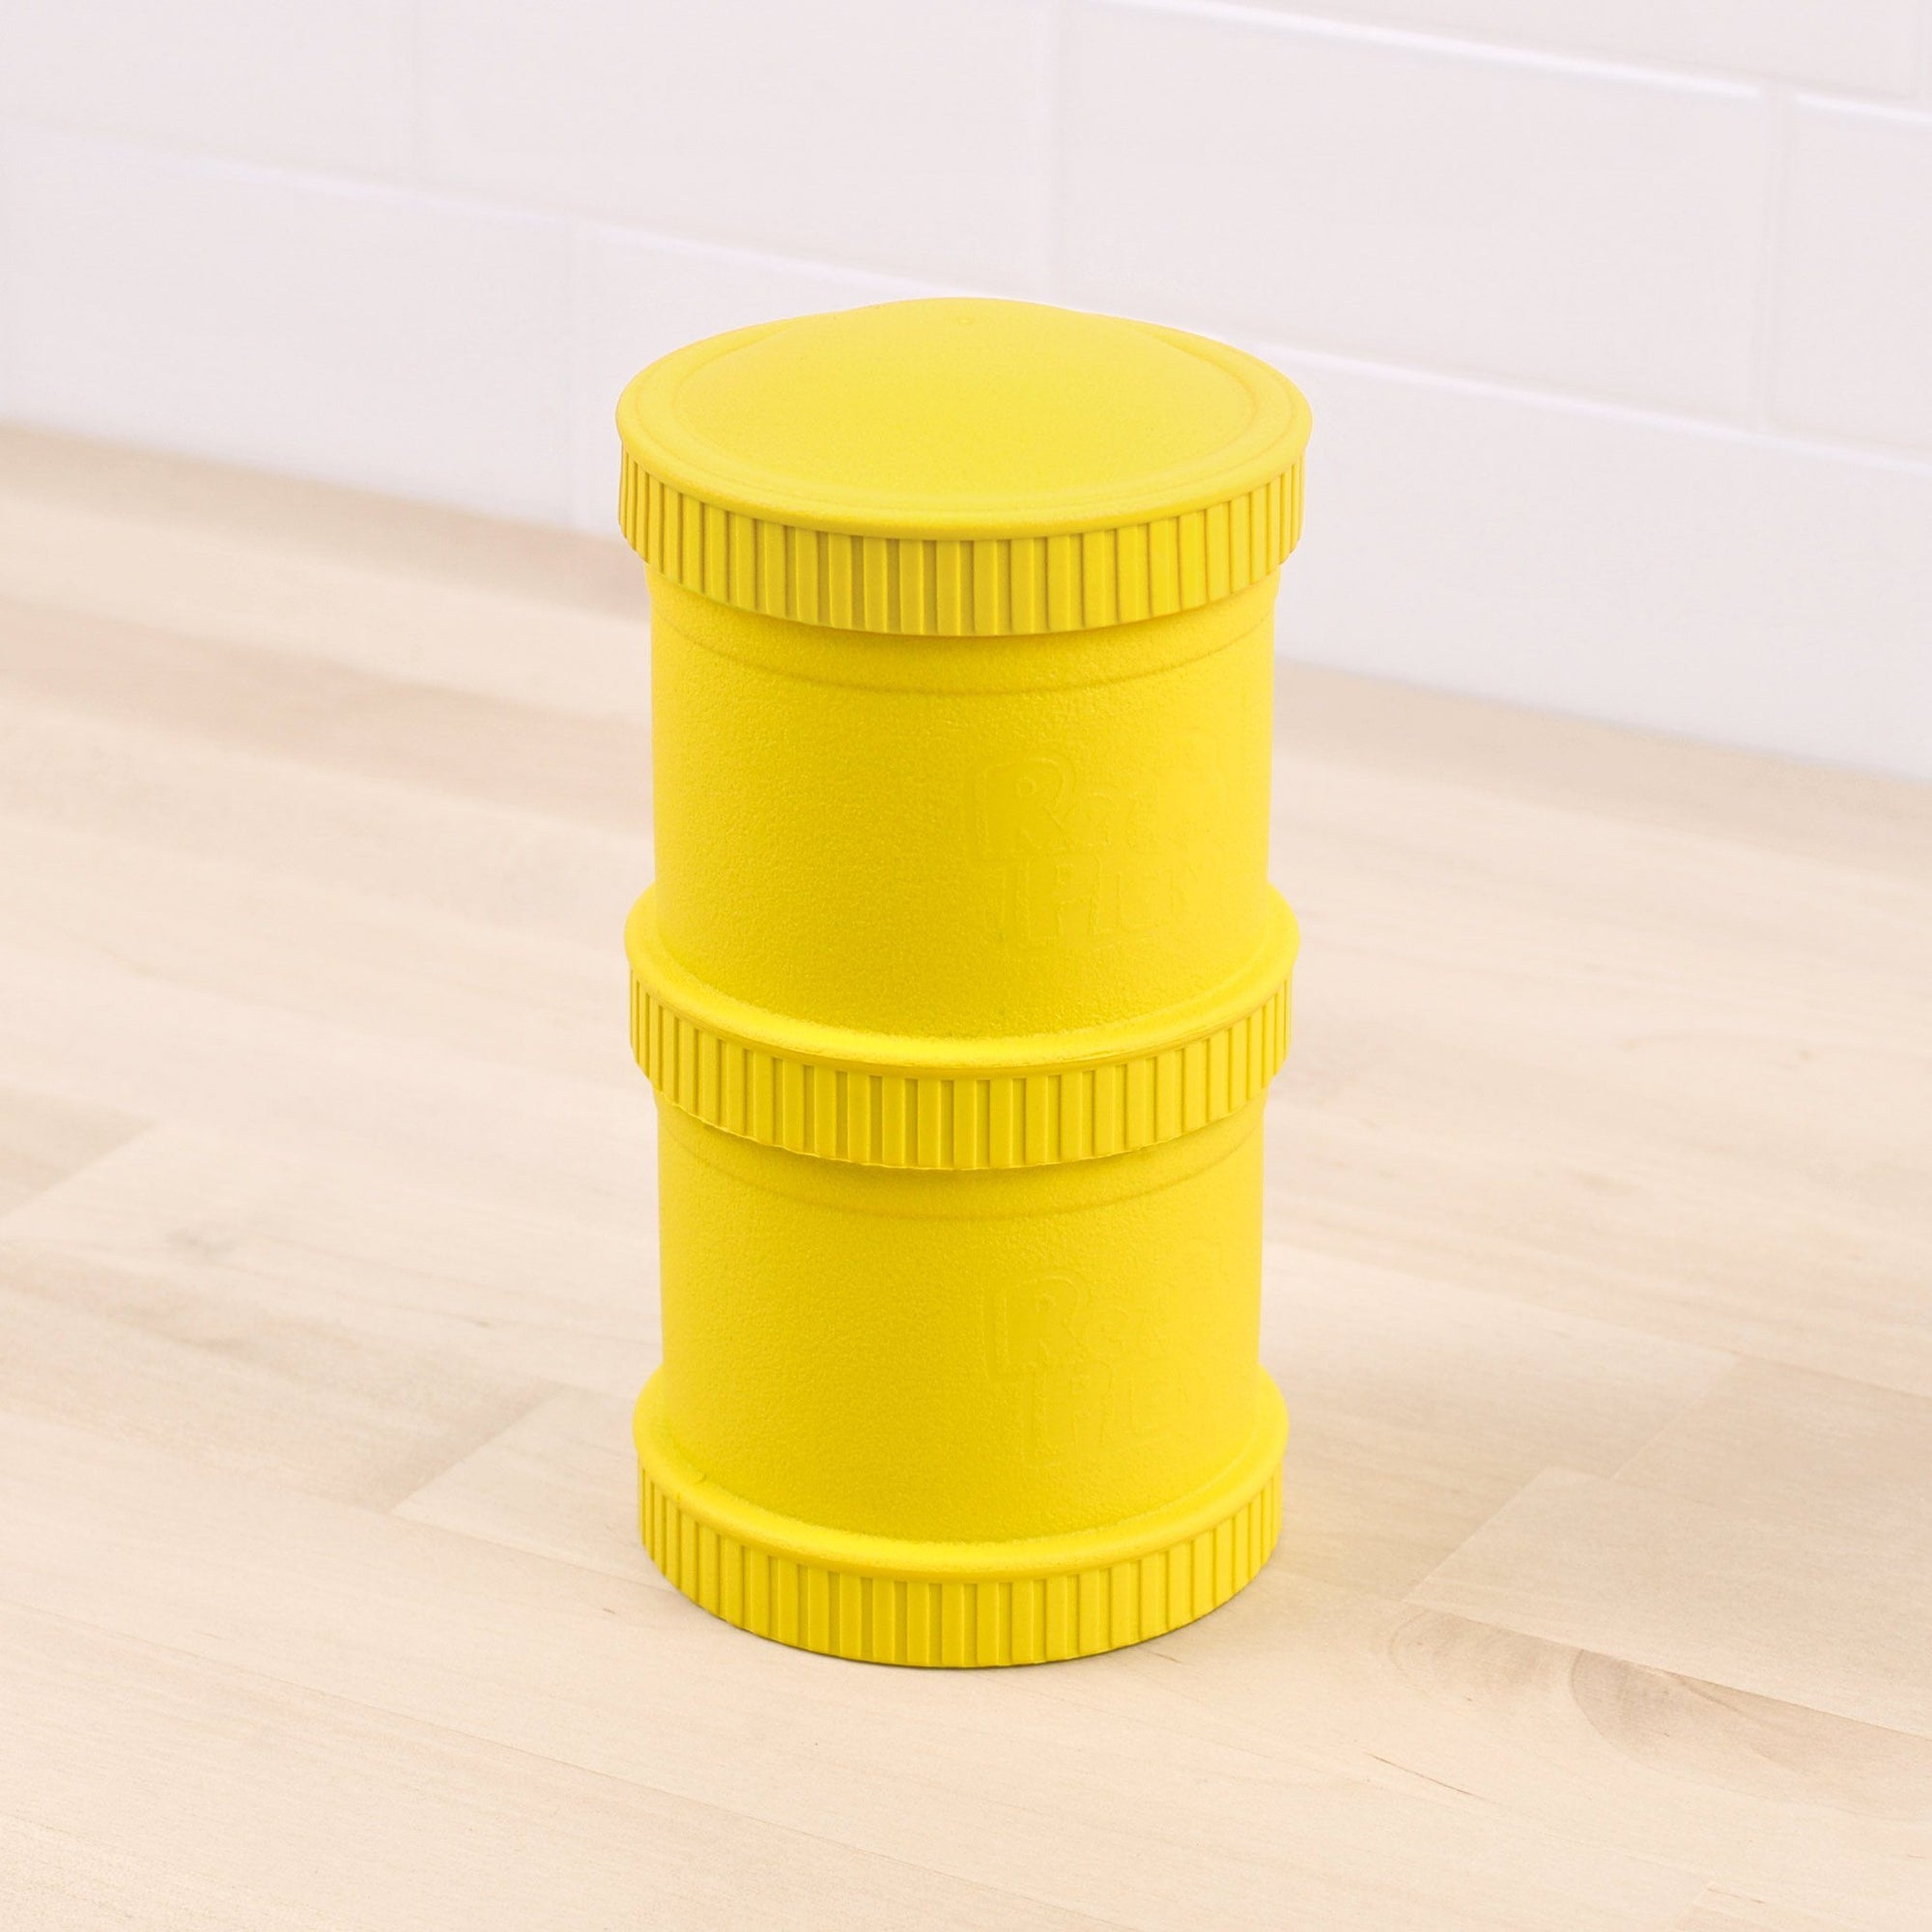 https://cdn.shopify.com/s/files/1/0253/3320/2996/products/snack-stack-one-lid--001_80406_yellow_2000x.jpg?v=1610499607